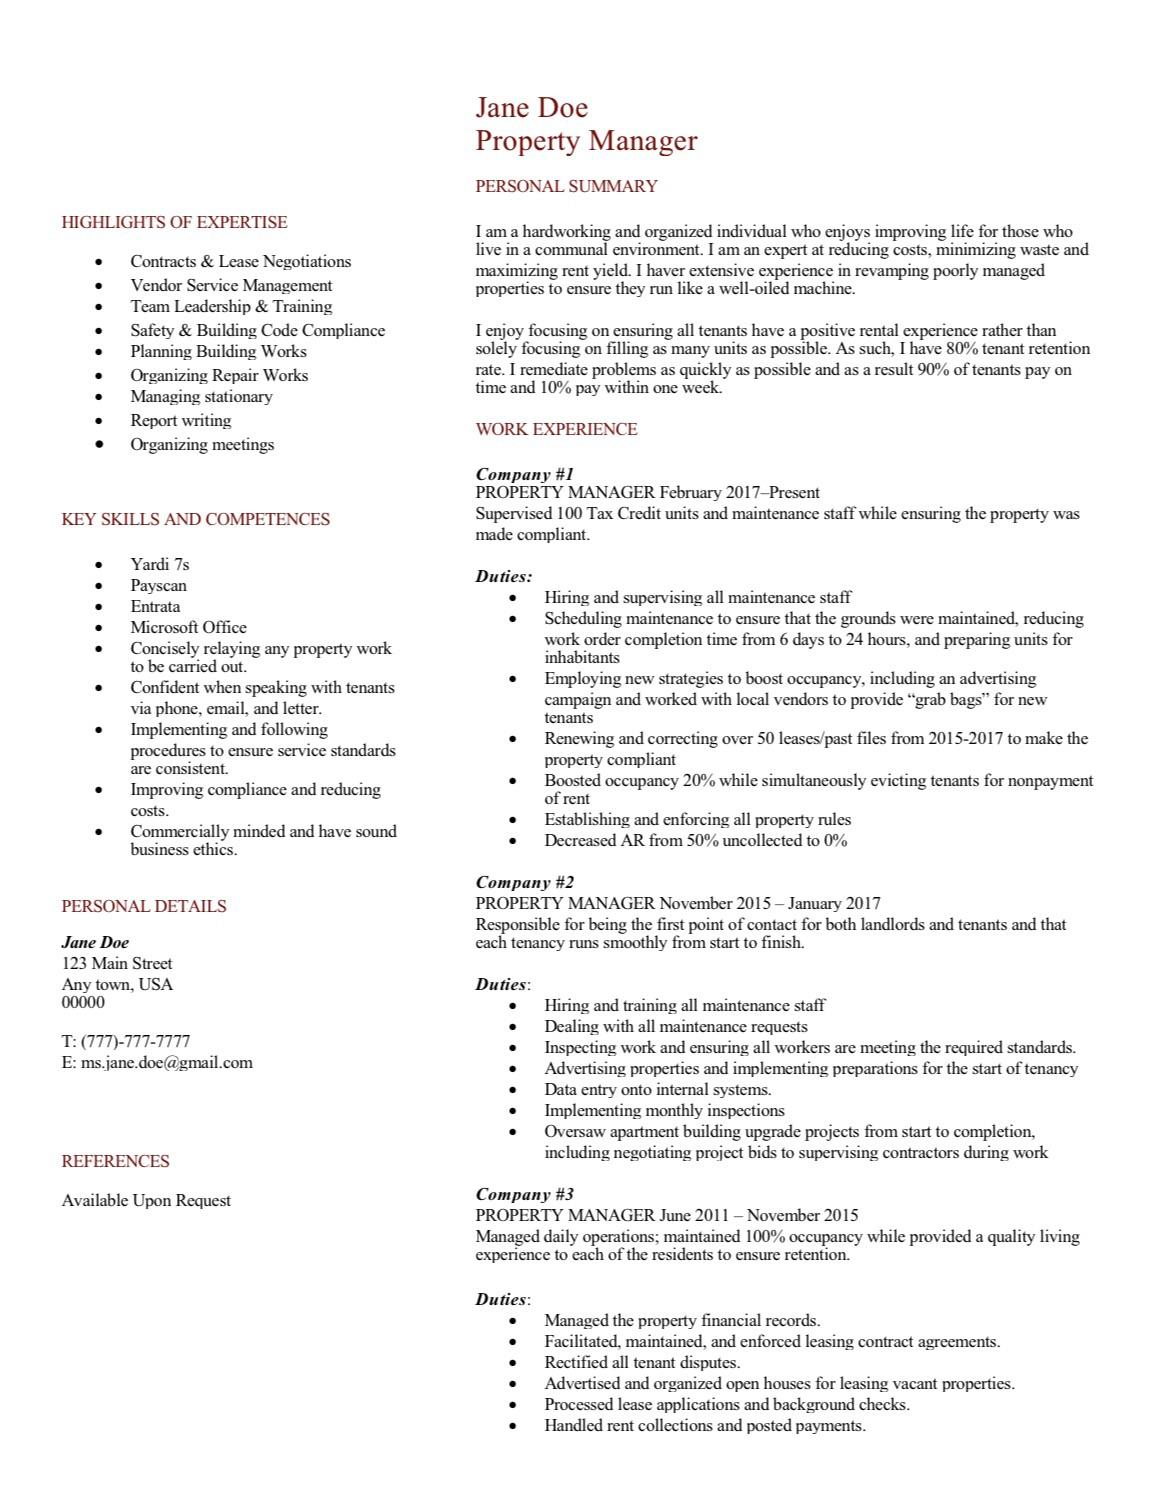 Property Manager Resume! : resumes Throughout Property Manager Job Description Template For Property Manager Job Description Template